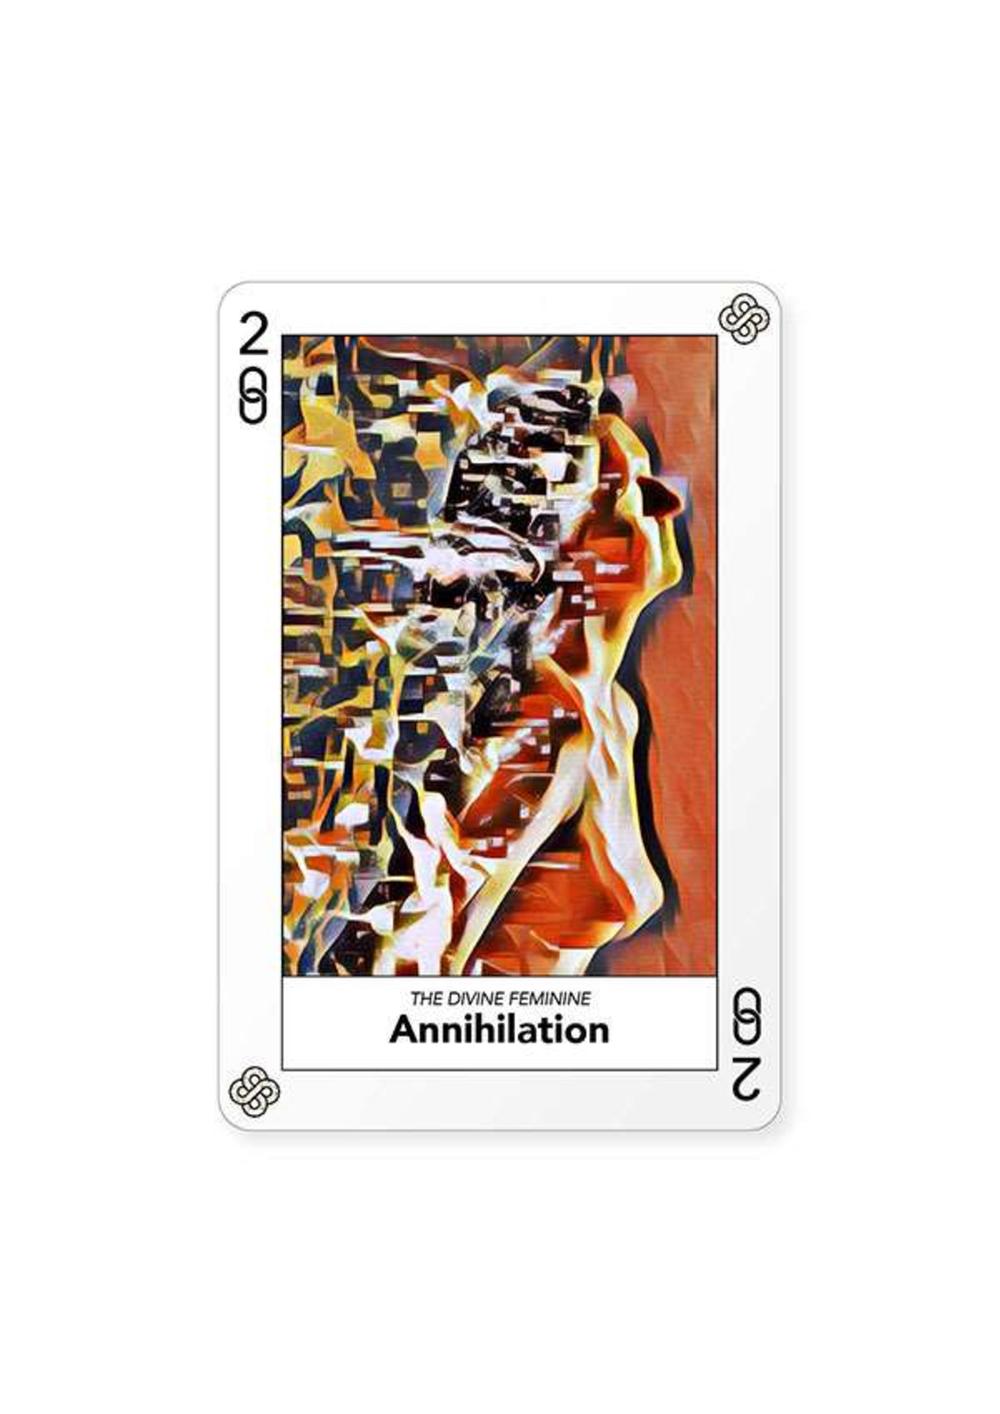 Certificate of Authenticity and Consignment - Annihilation